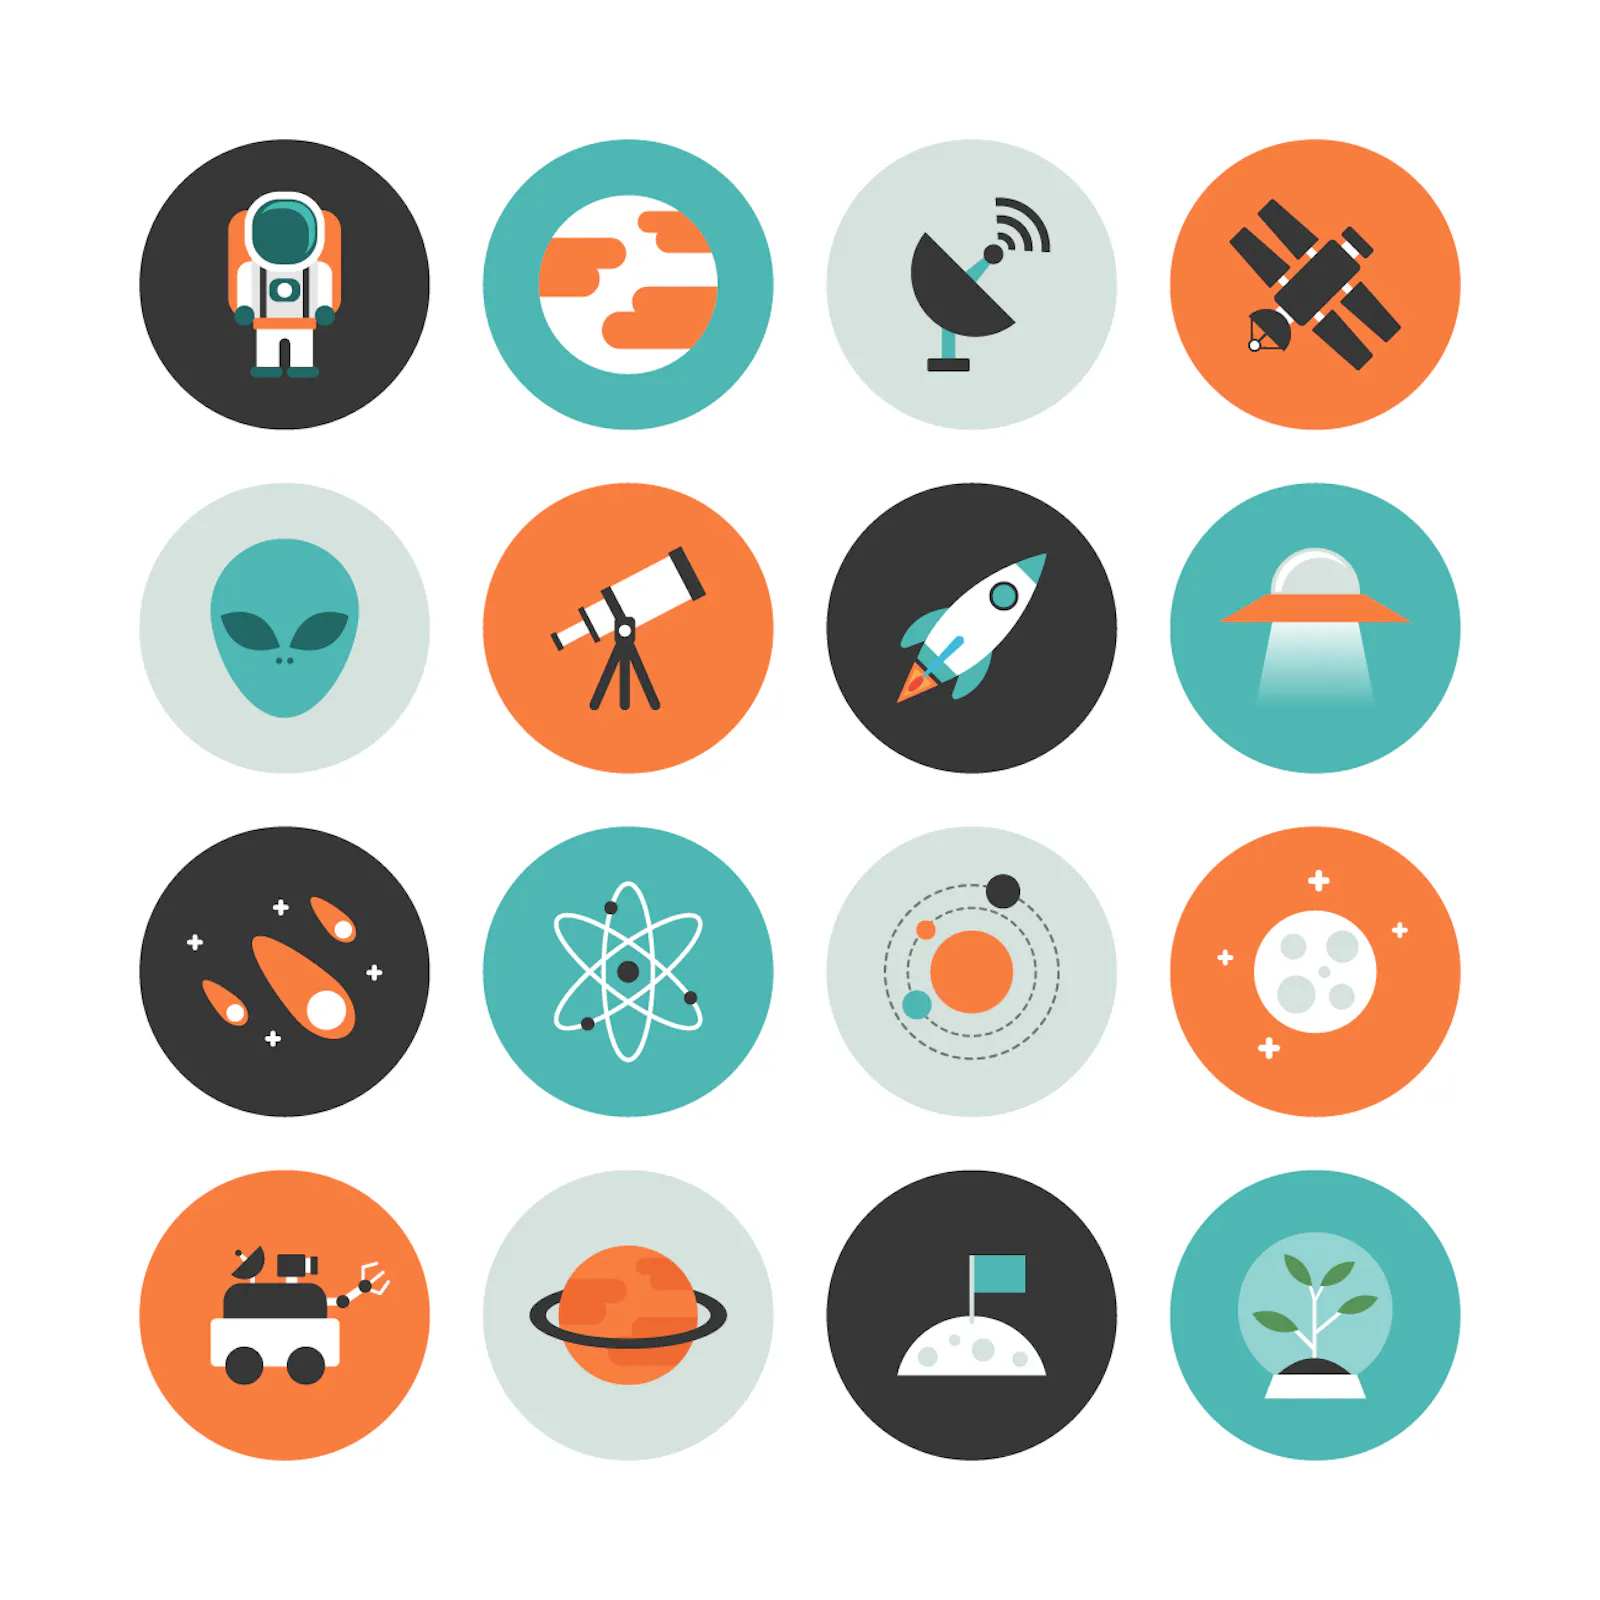 Weltraum Icons https://www.freepik.com/free-vector/space-icon-collection_1000139.htm#query=ufo&position=5&from_view=search&track=sph